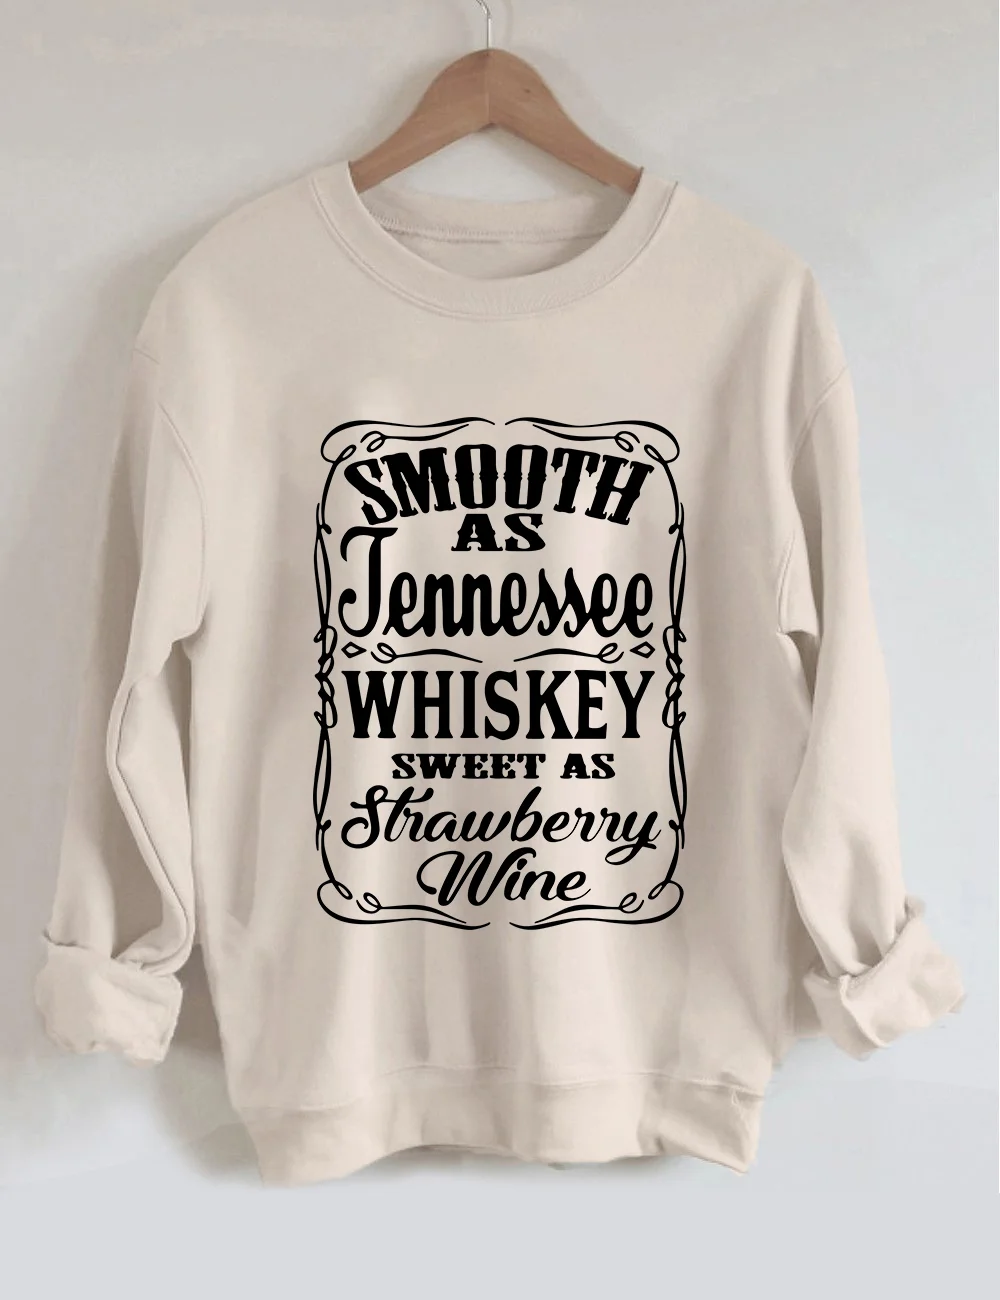 Smooth As Tennessee Whisky Sweet As Strawberry Wine Sweatshirt